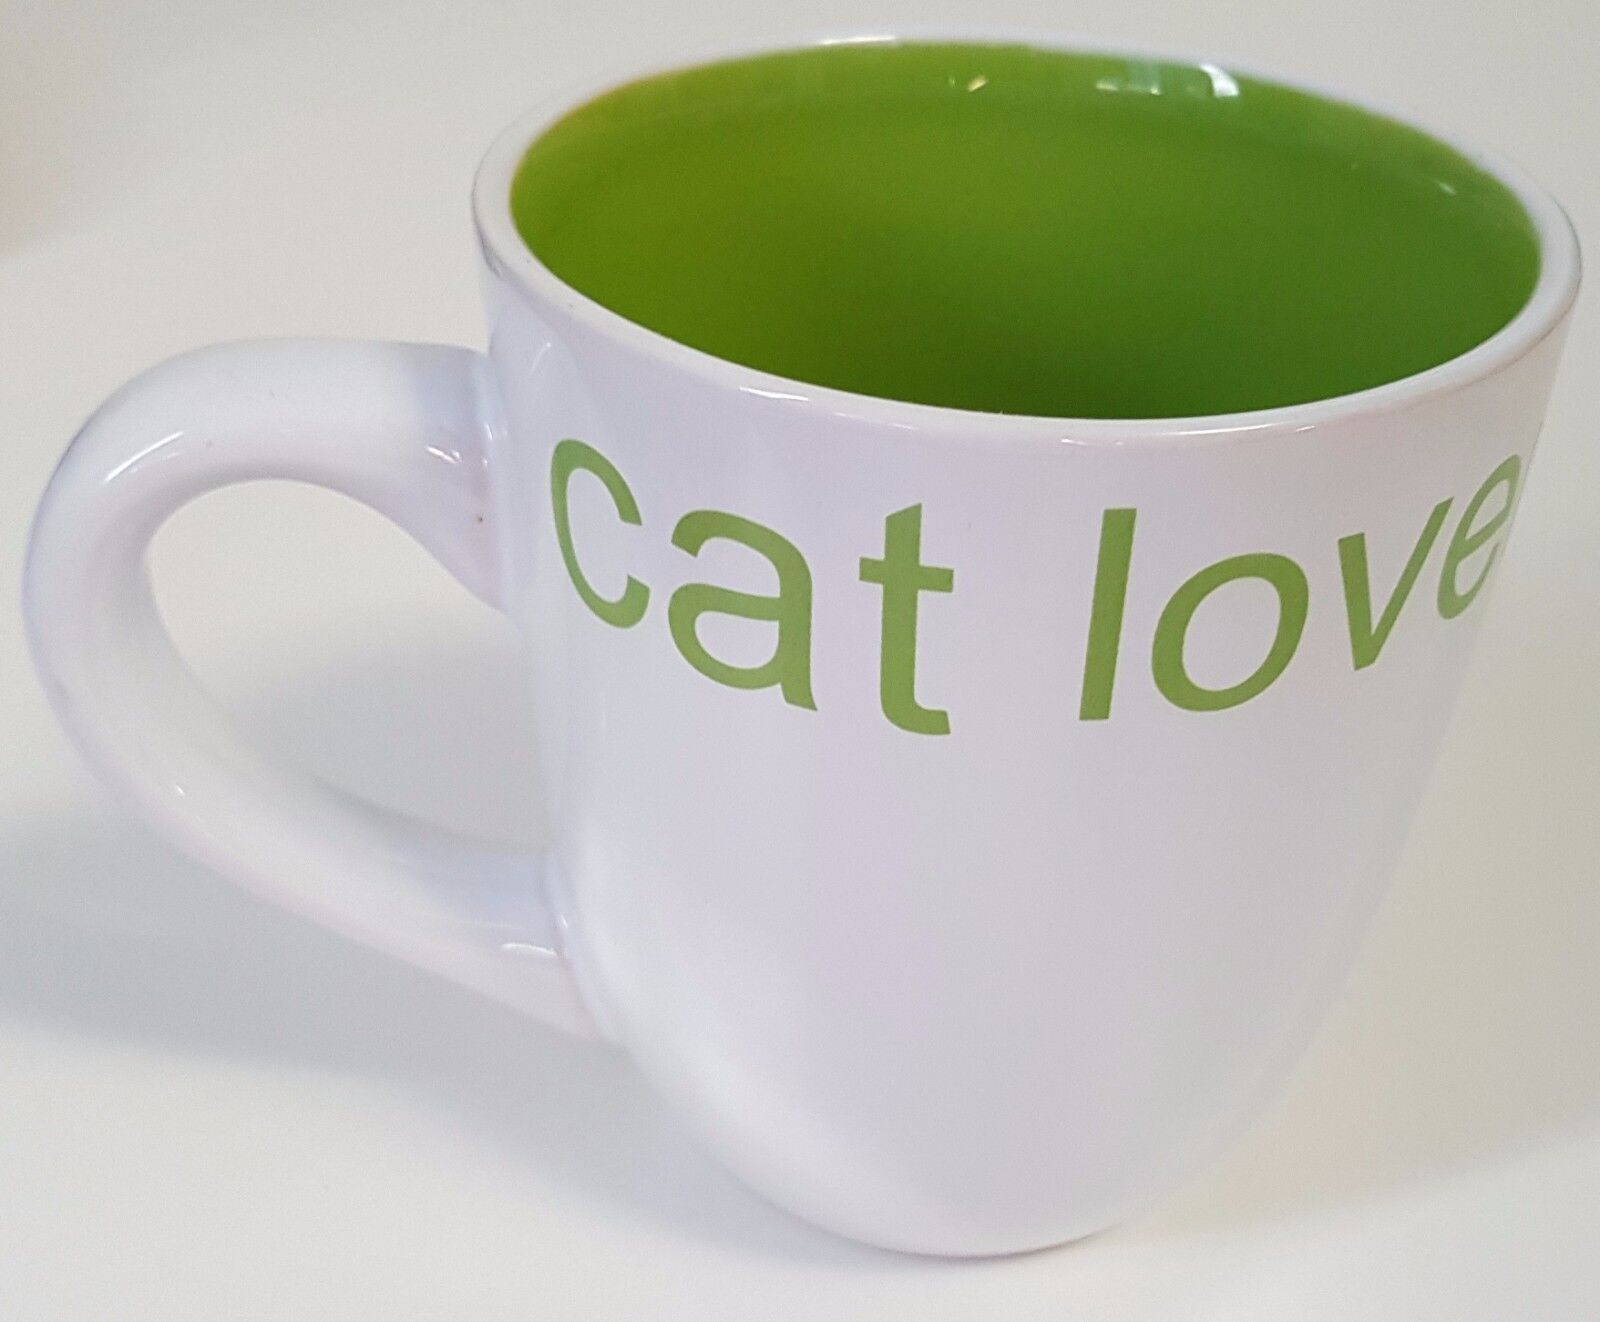 Petrageous Designs Cat Lover Coffee Mug Cup White Green Inside  T21